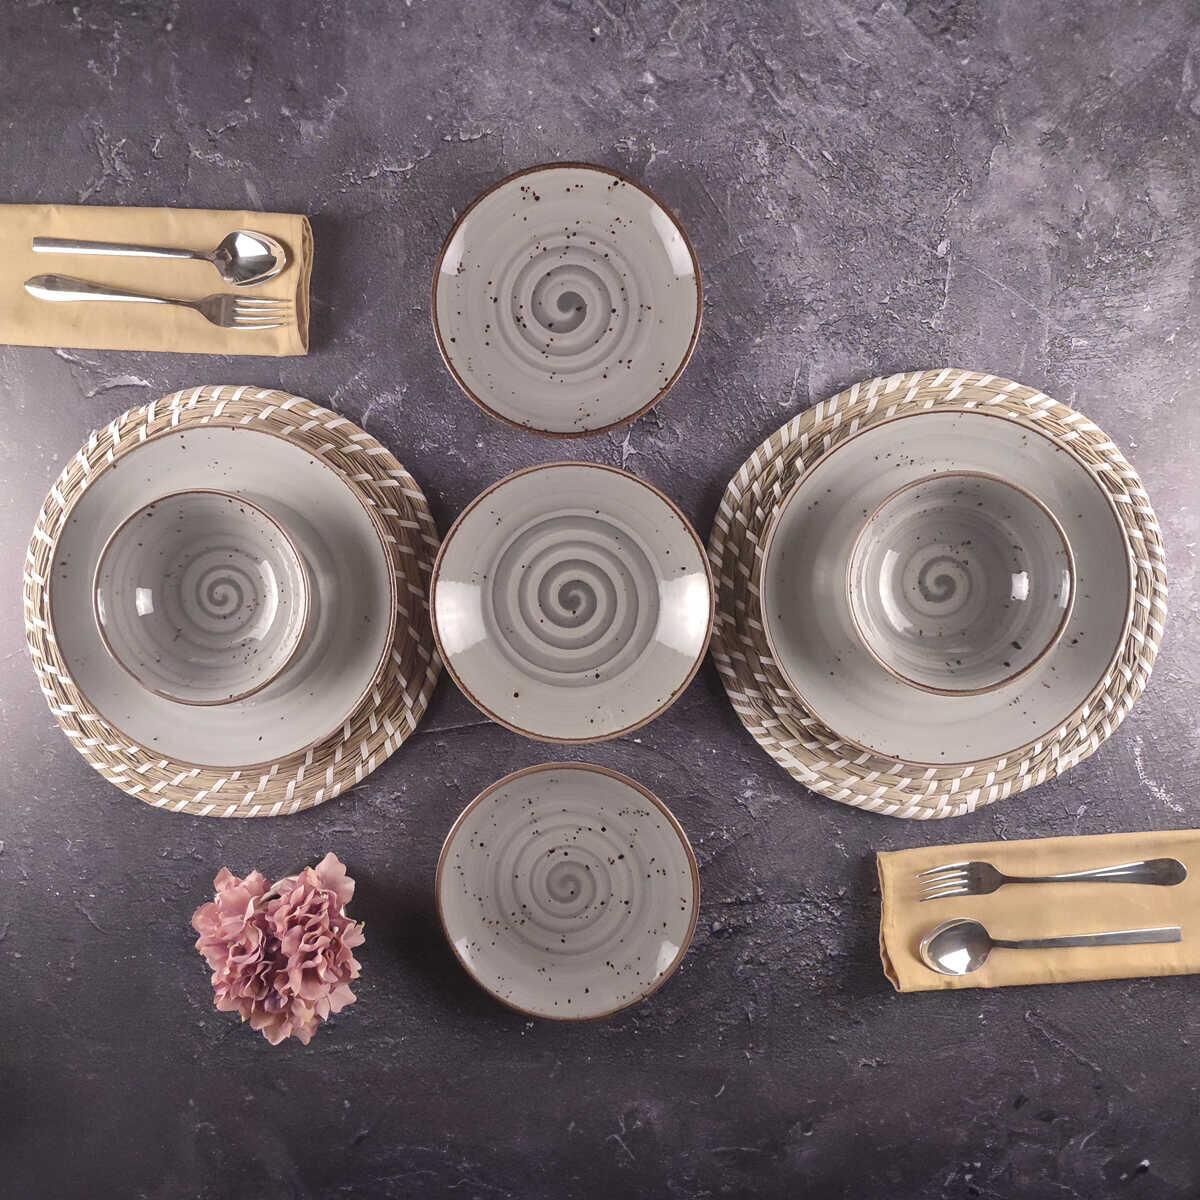 Tulu Sea Gray 24 Piece Dinner Set for 6 Persons